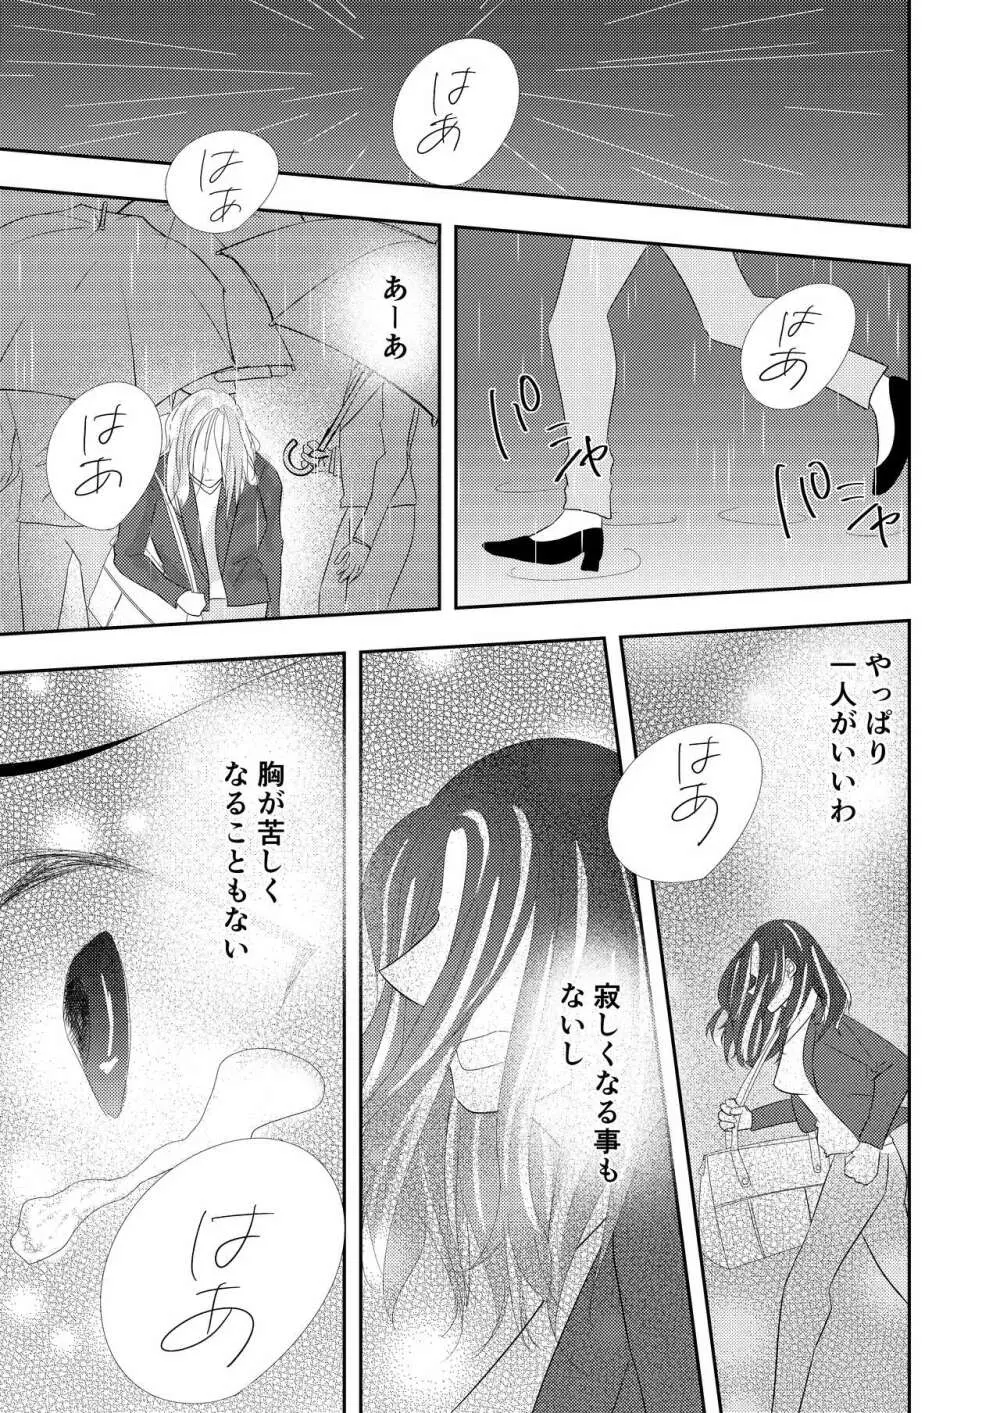 【TL】年下の幼馴染にプロポーズされました！？ - page19